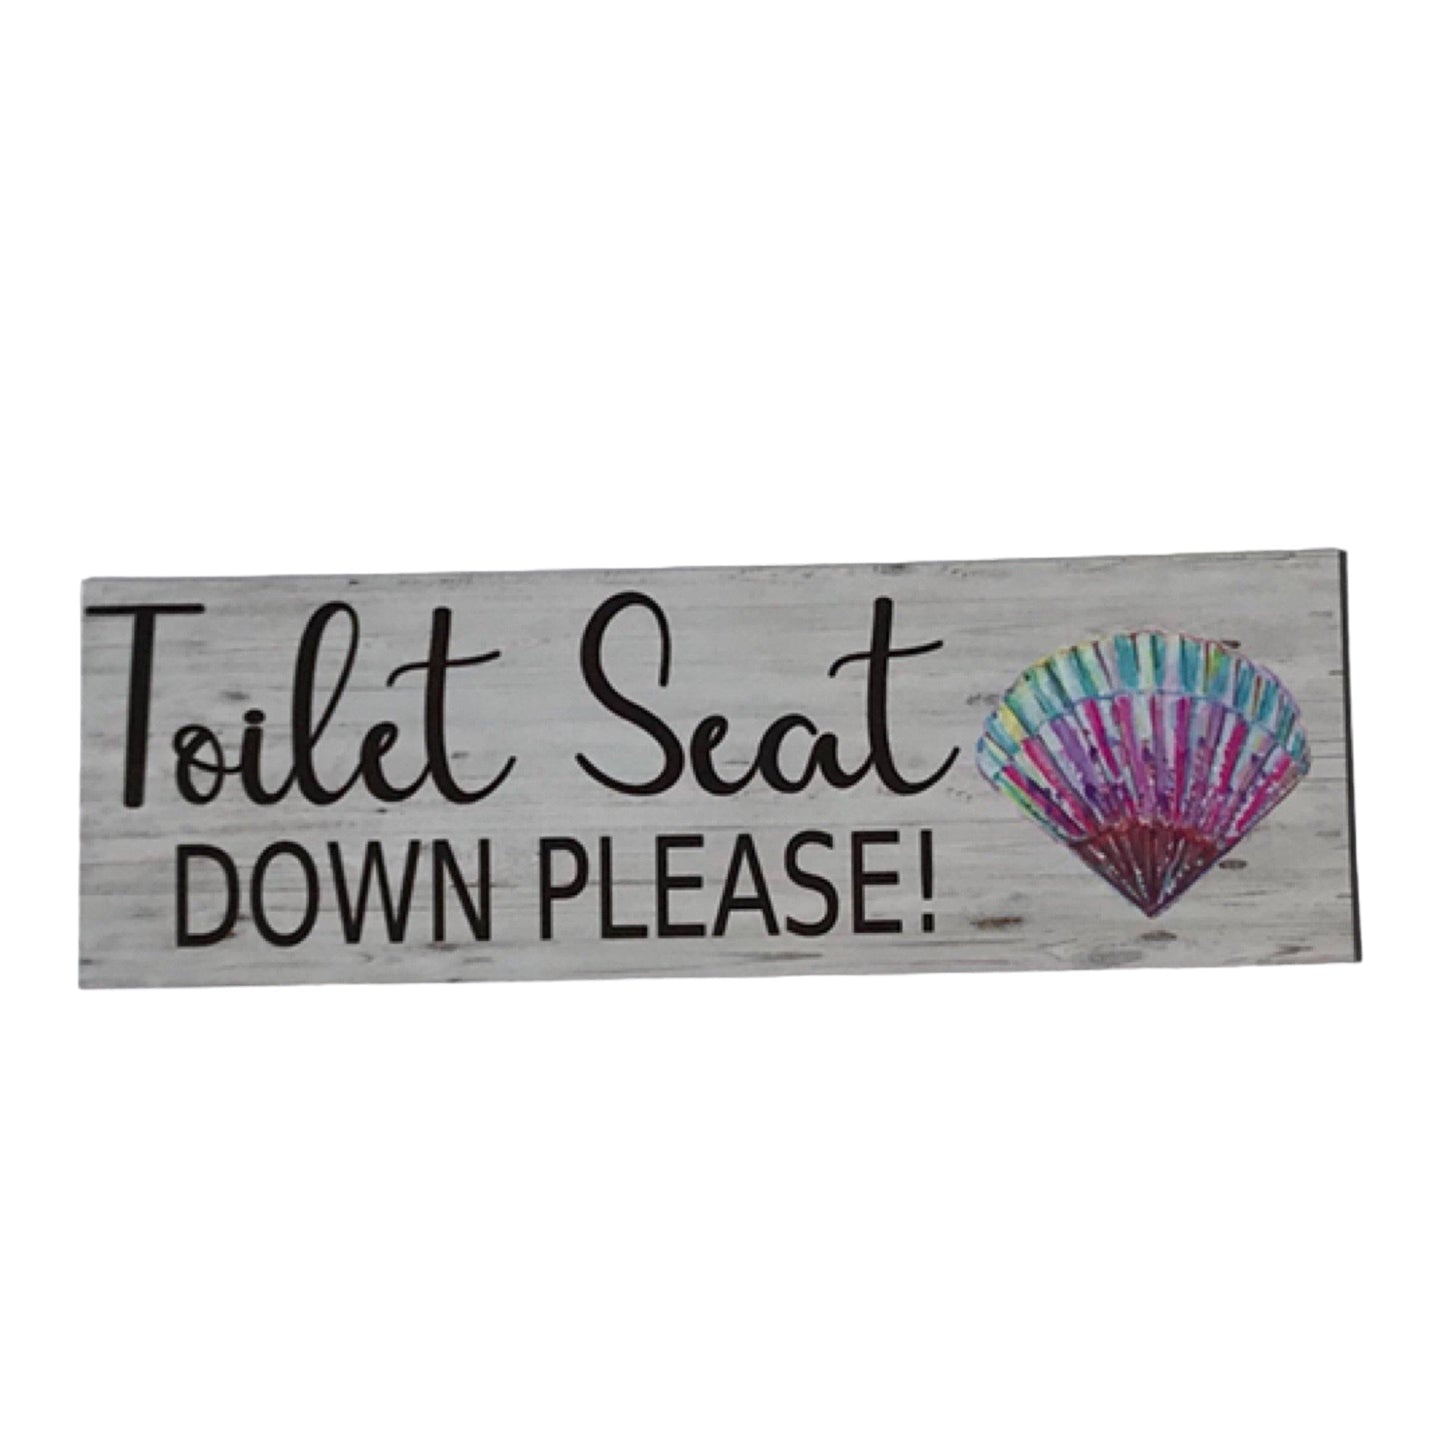 Toilet Seat Down Please Shell Sign